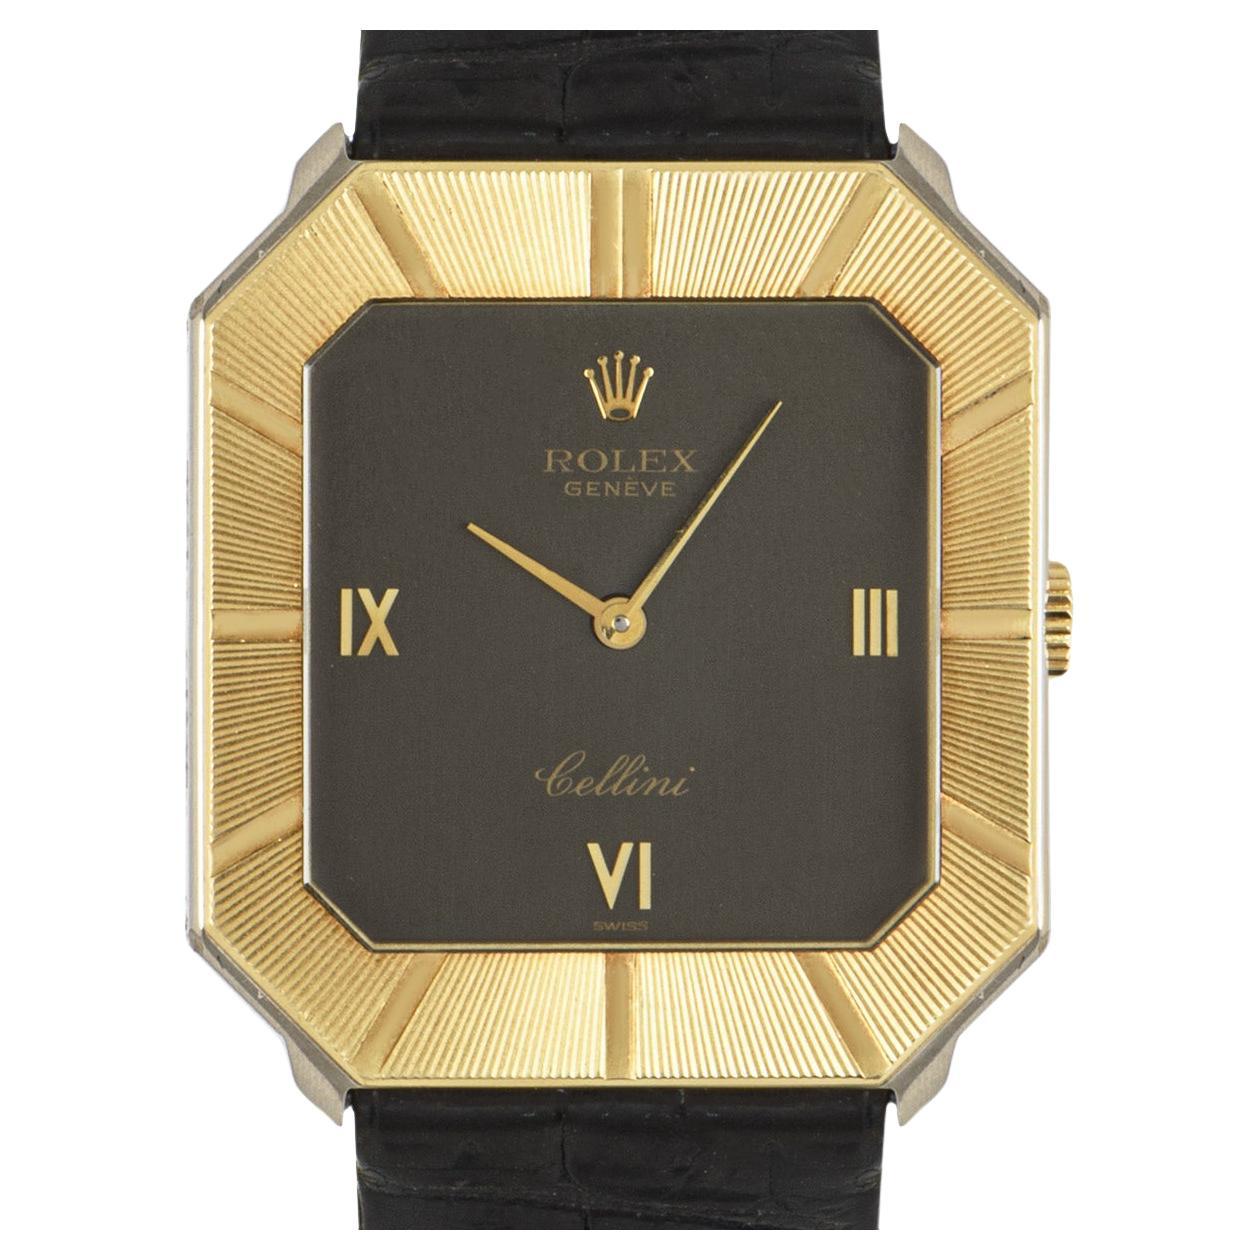 A stunning Cellini two-tone wristwatch in yellow gold and white gold by Rolex. Features a black dial with applied roman numerals, a fixed yellow gold bezel and a white gold case back. The watch is encased with a sapphire glass and powered by a